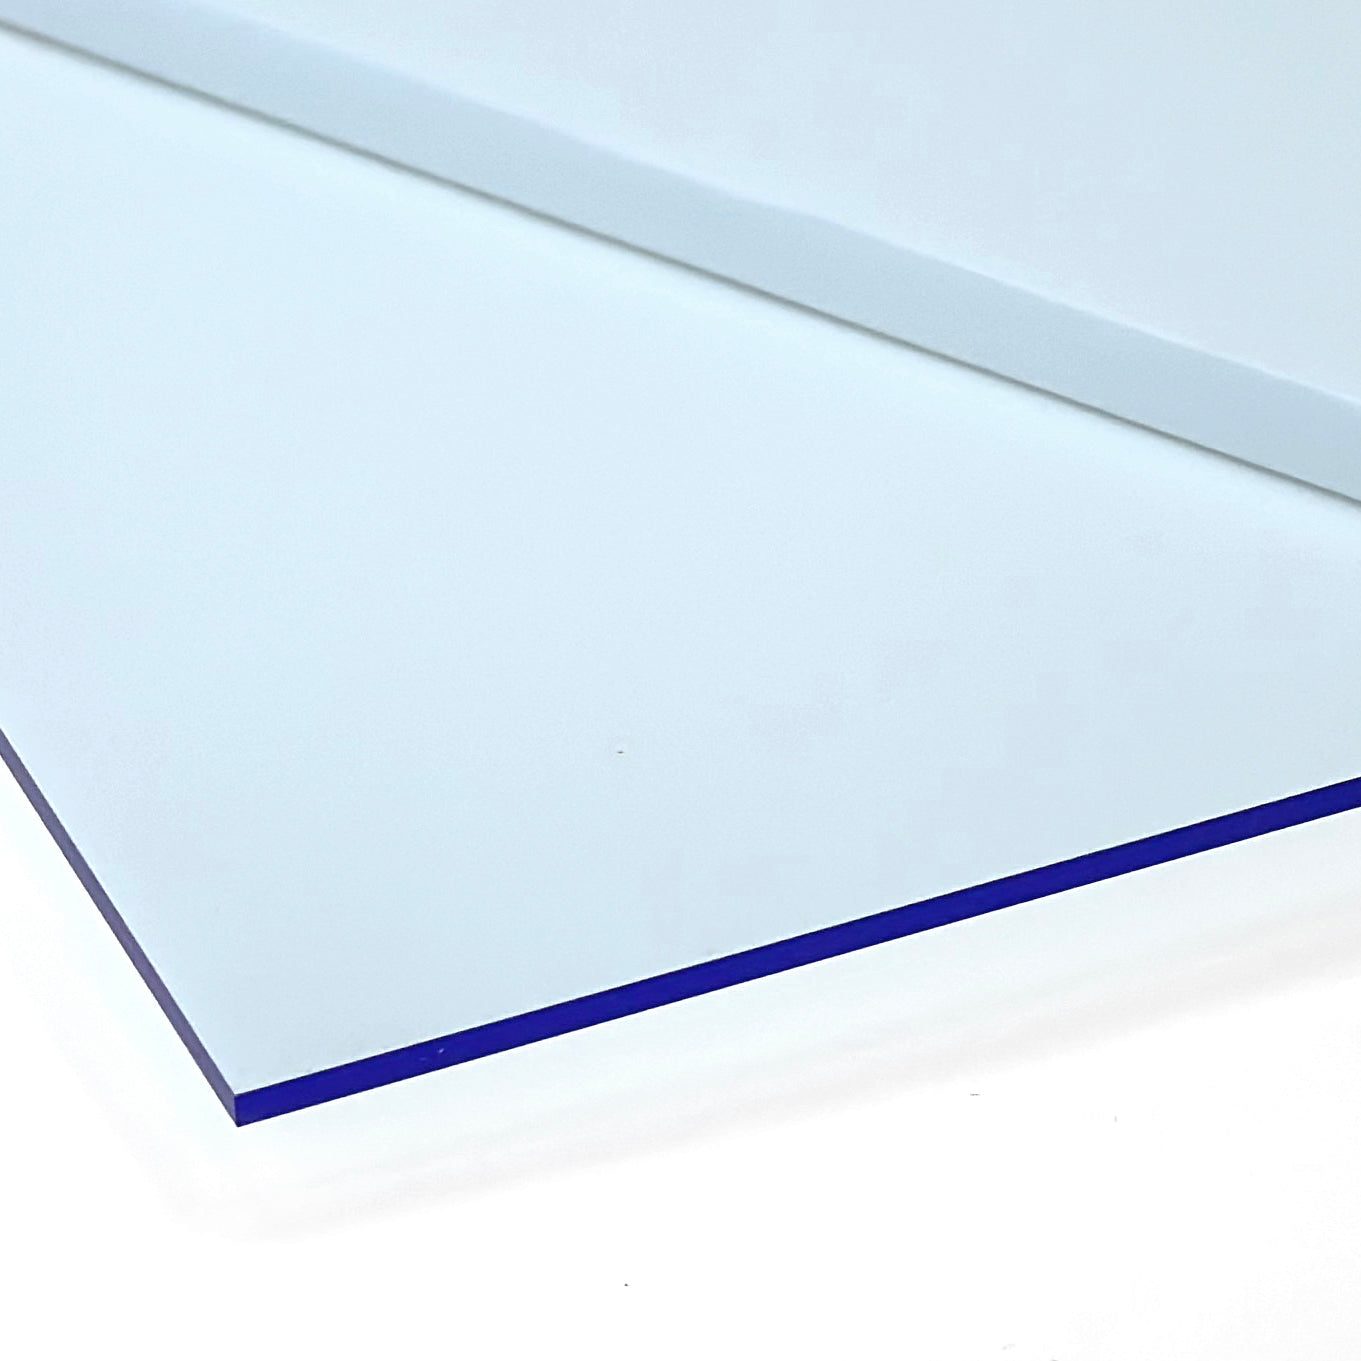 Transparent Blue Acrylic with laser cutting only - 300x200mm